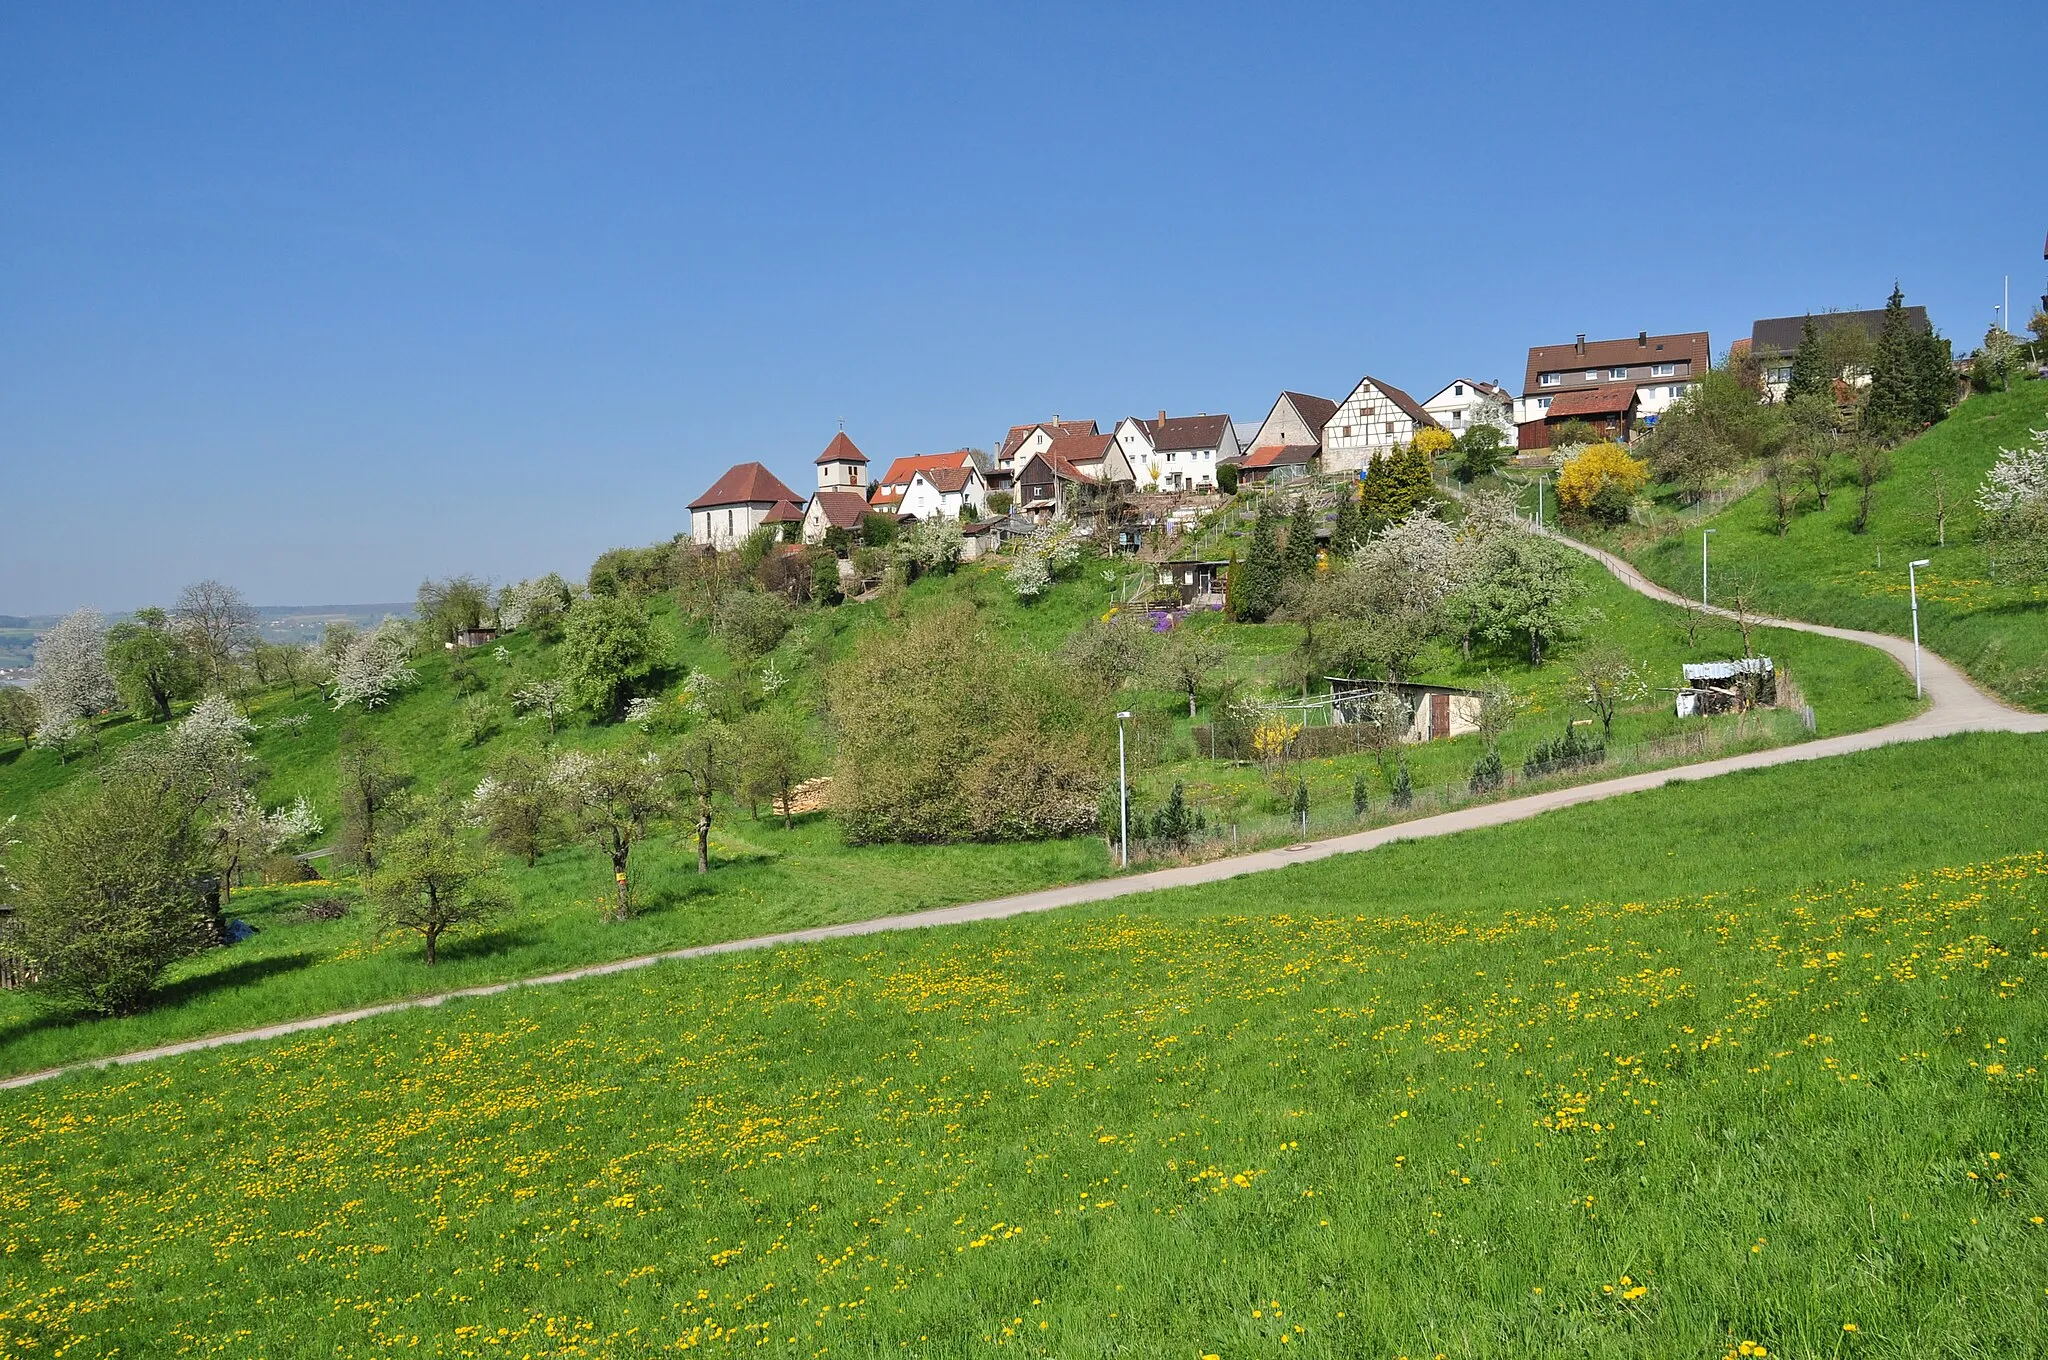 Photo showing: Moenchberg "Monk-mountain", a small village close to Herrenberg in Germany